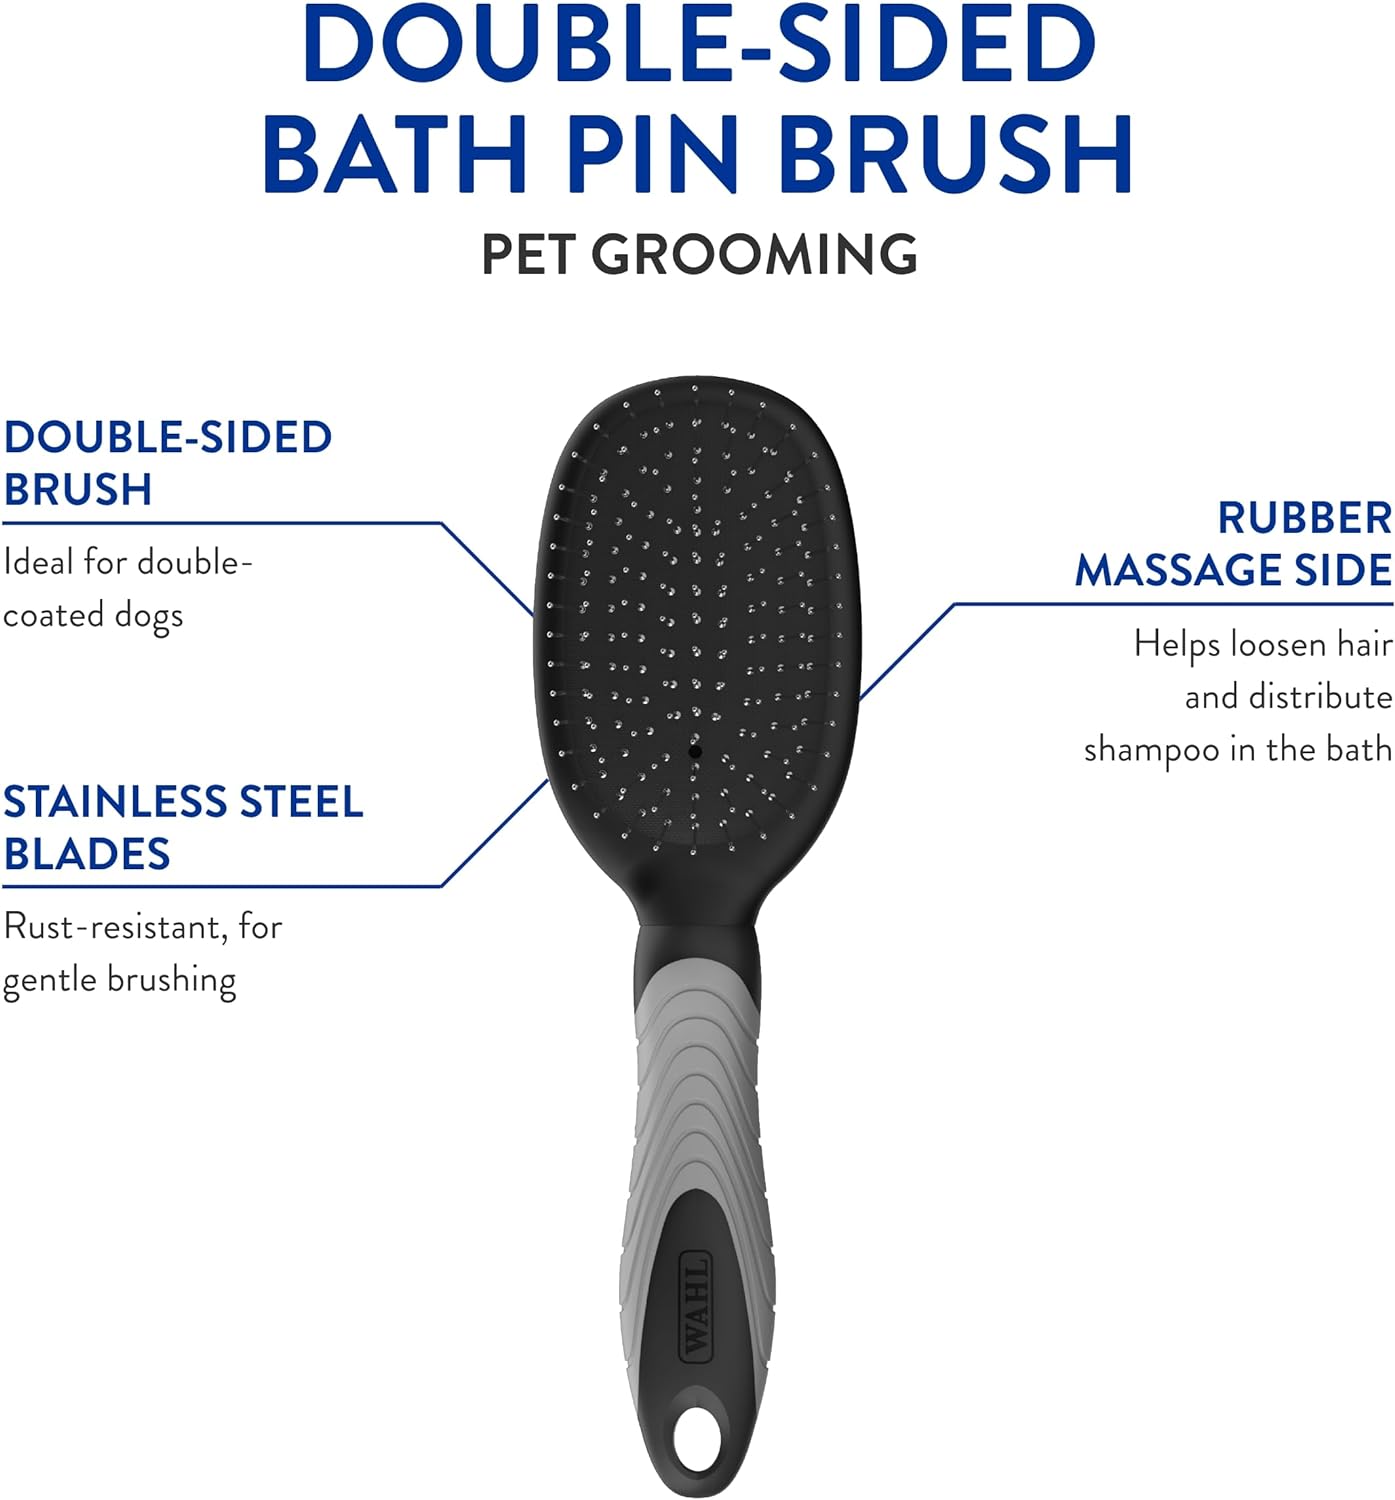 WAHL Professional Animal Double Sided Bath Pin Brush for Dogs (#858477) - Pet Brush to Groom Dogs - For Akitas, Huskies & Australian Shepherds - Durable Dog Pin Brush